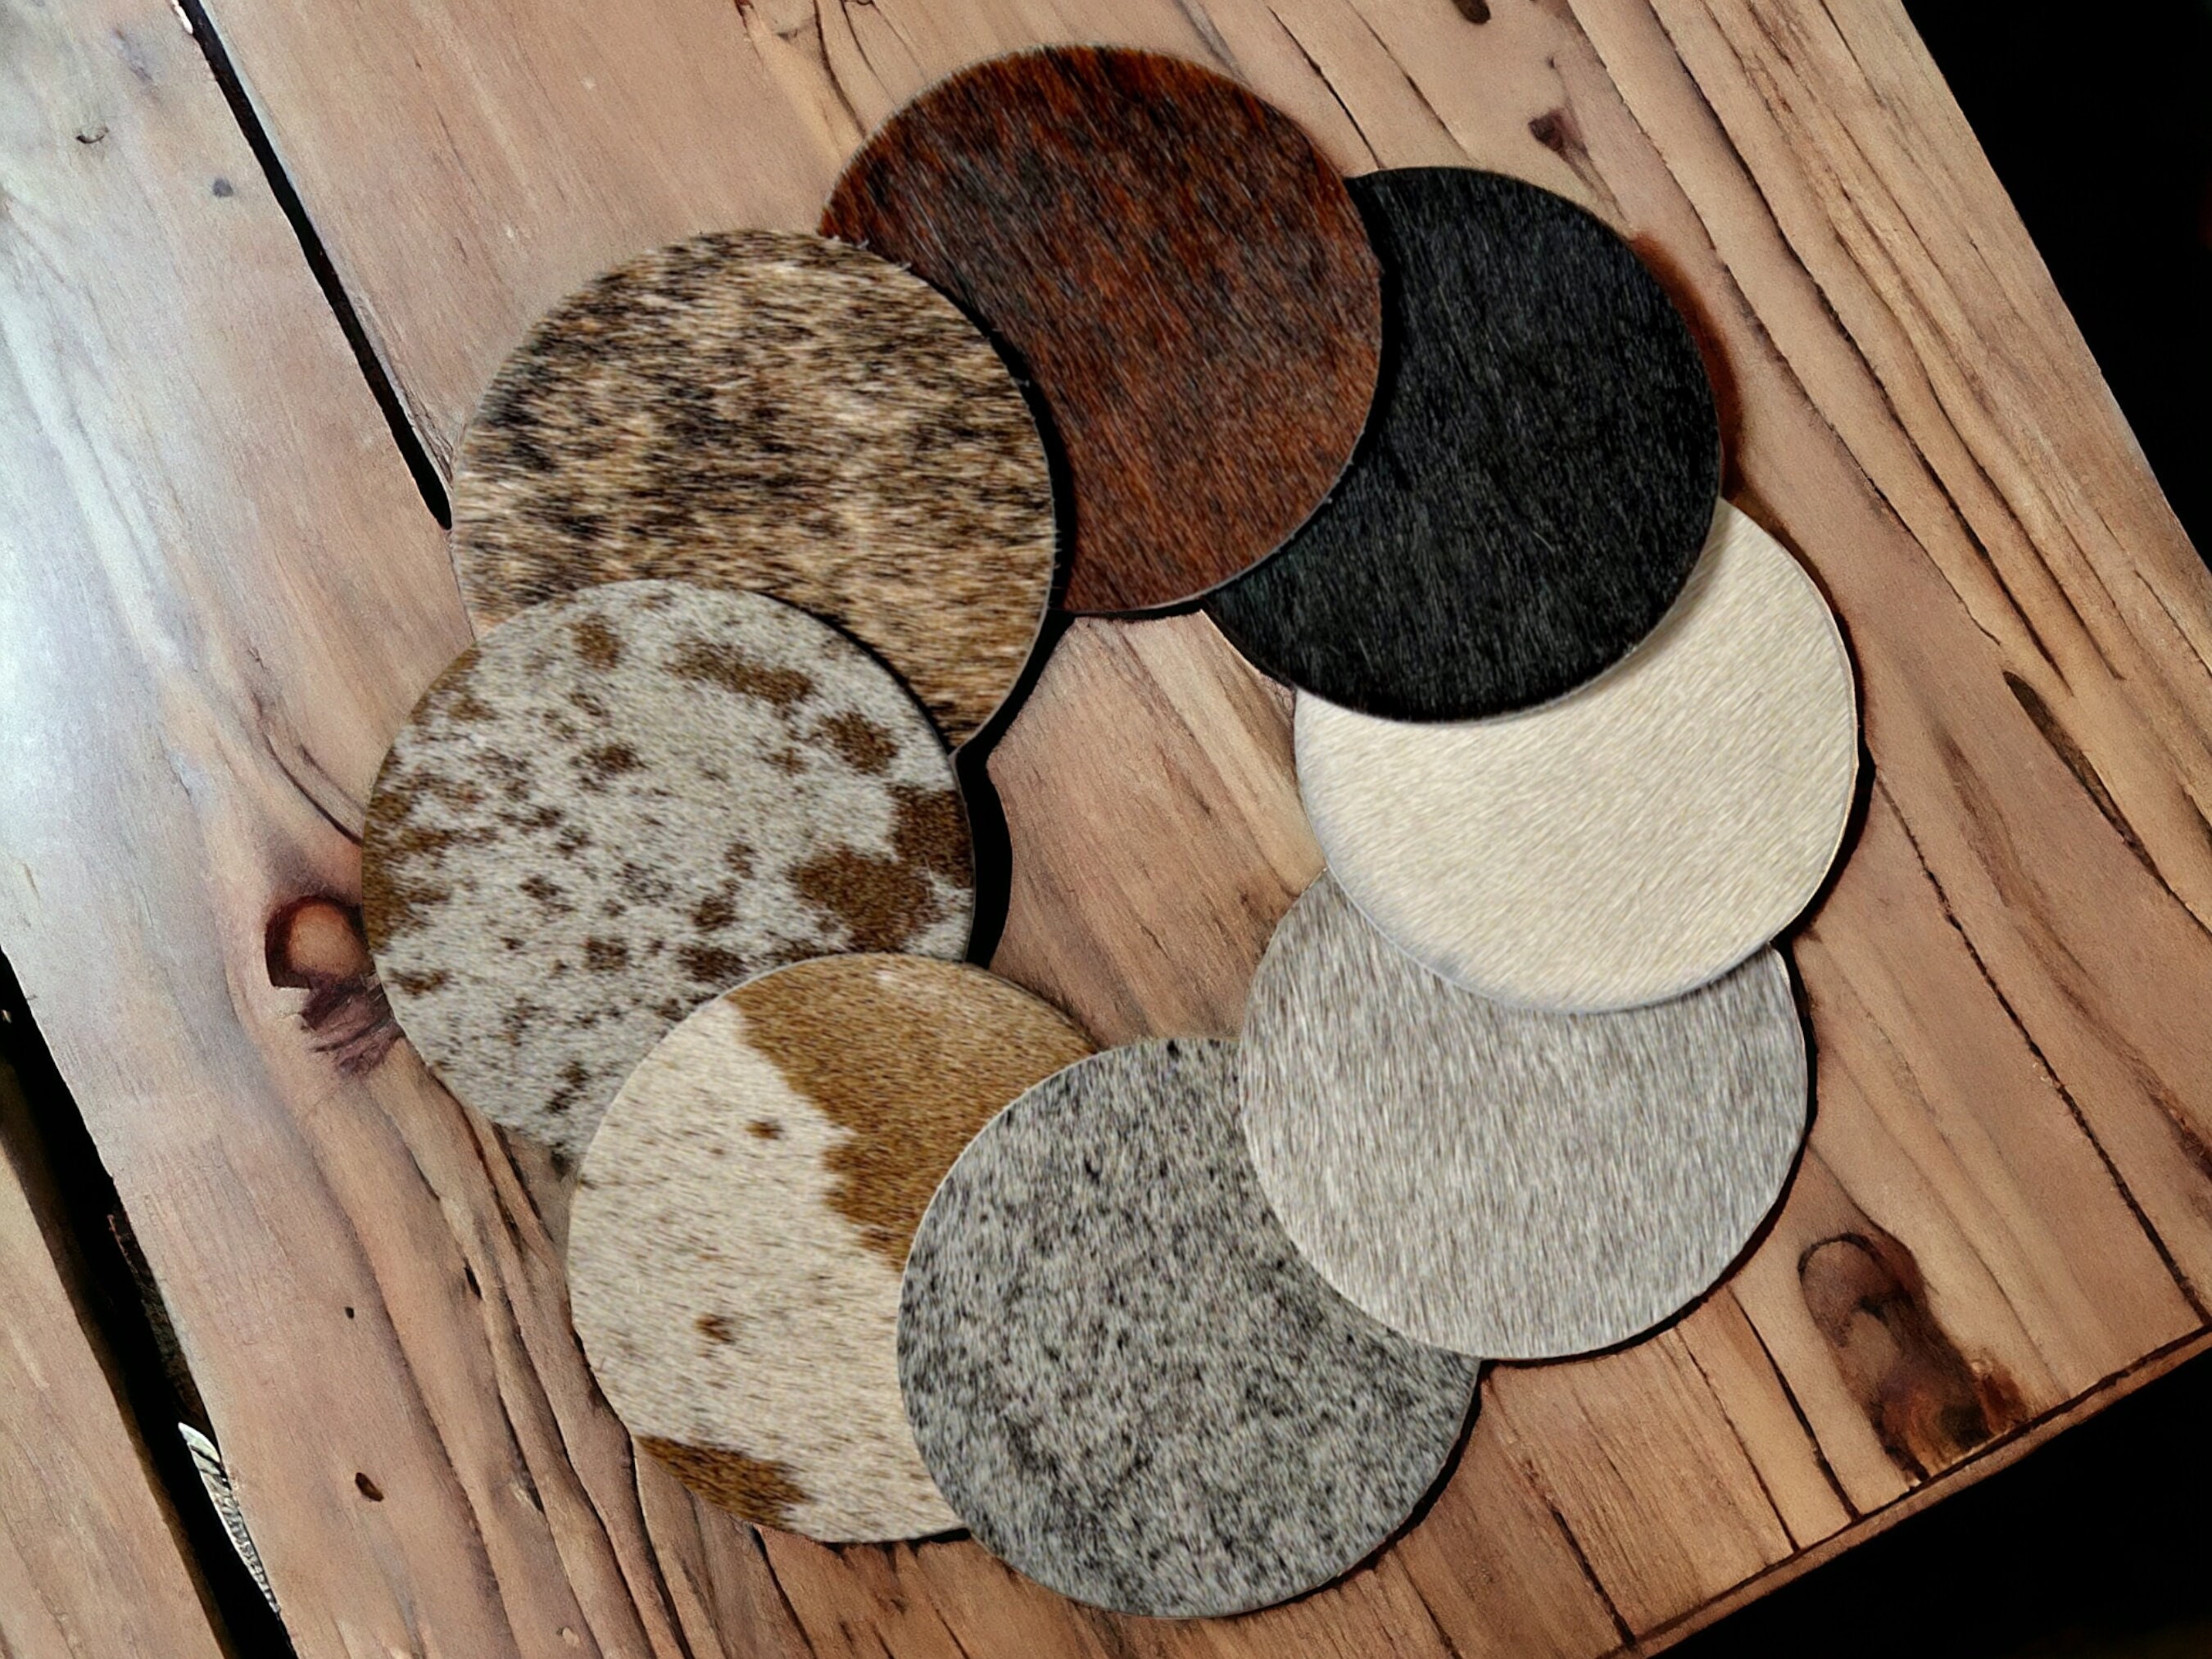 45x30cm Imitation Wood Craft Grain Placemat PU Leather Pad For